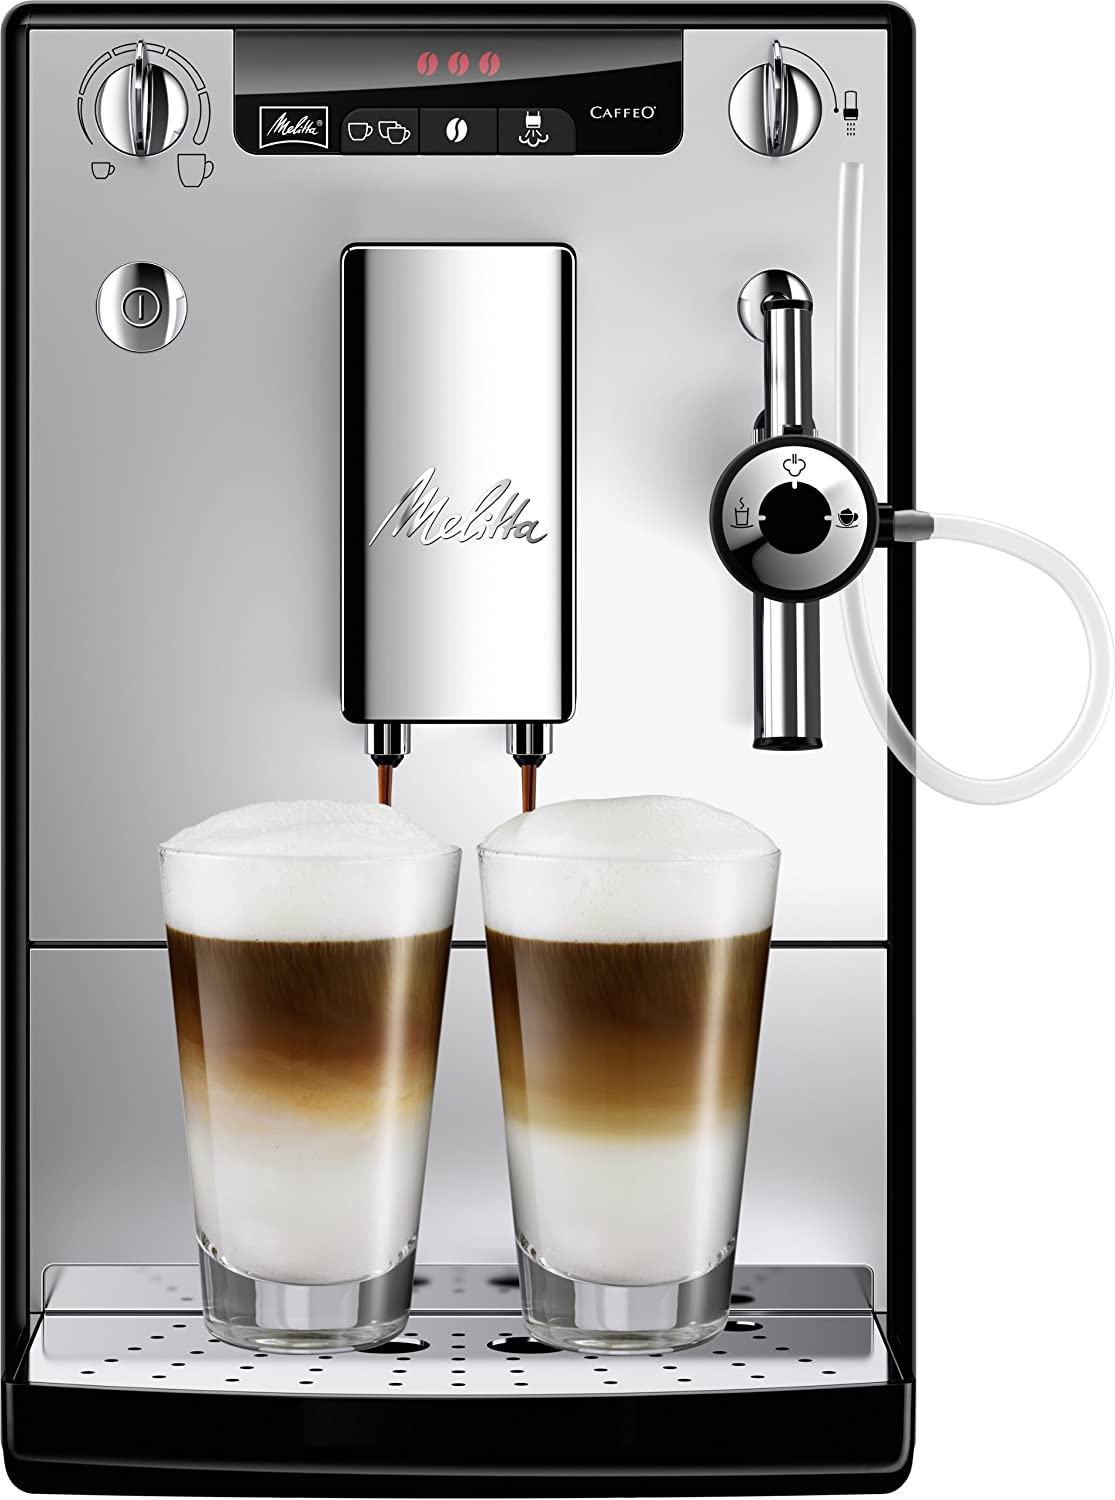 Melitta Caffeo Solo & Perfect Milk E957-101 Slim Fully Automatic Coffee Machine with Auto Cappuccinatore Automatic Cleaning Programmes Automatic Grind Volume Control